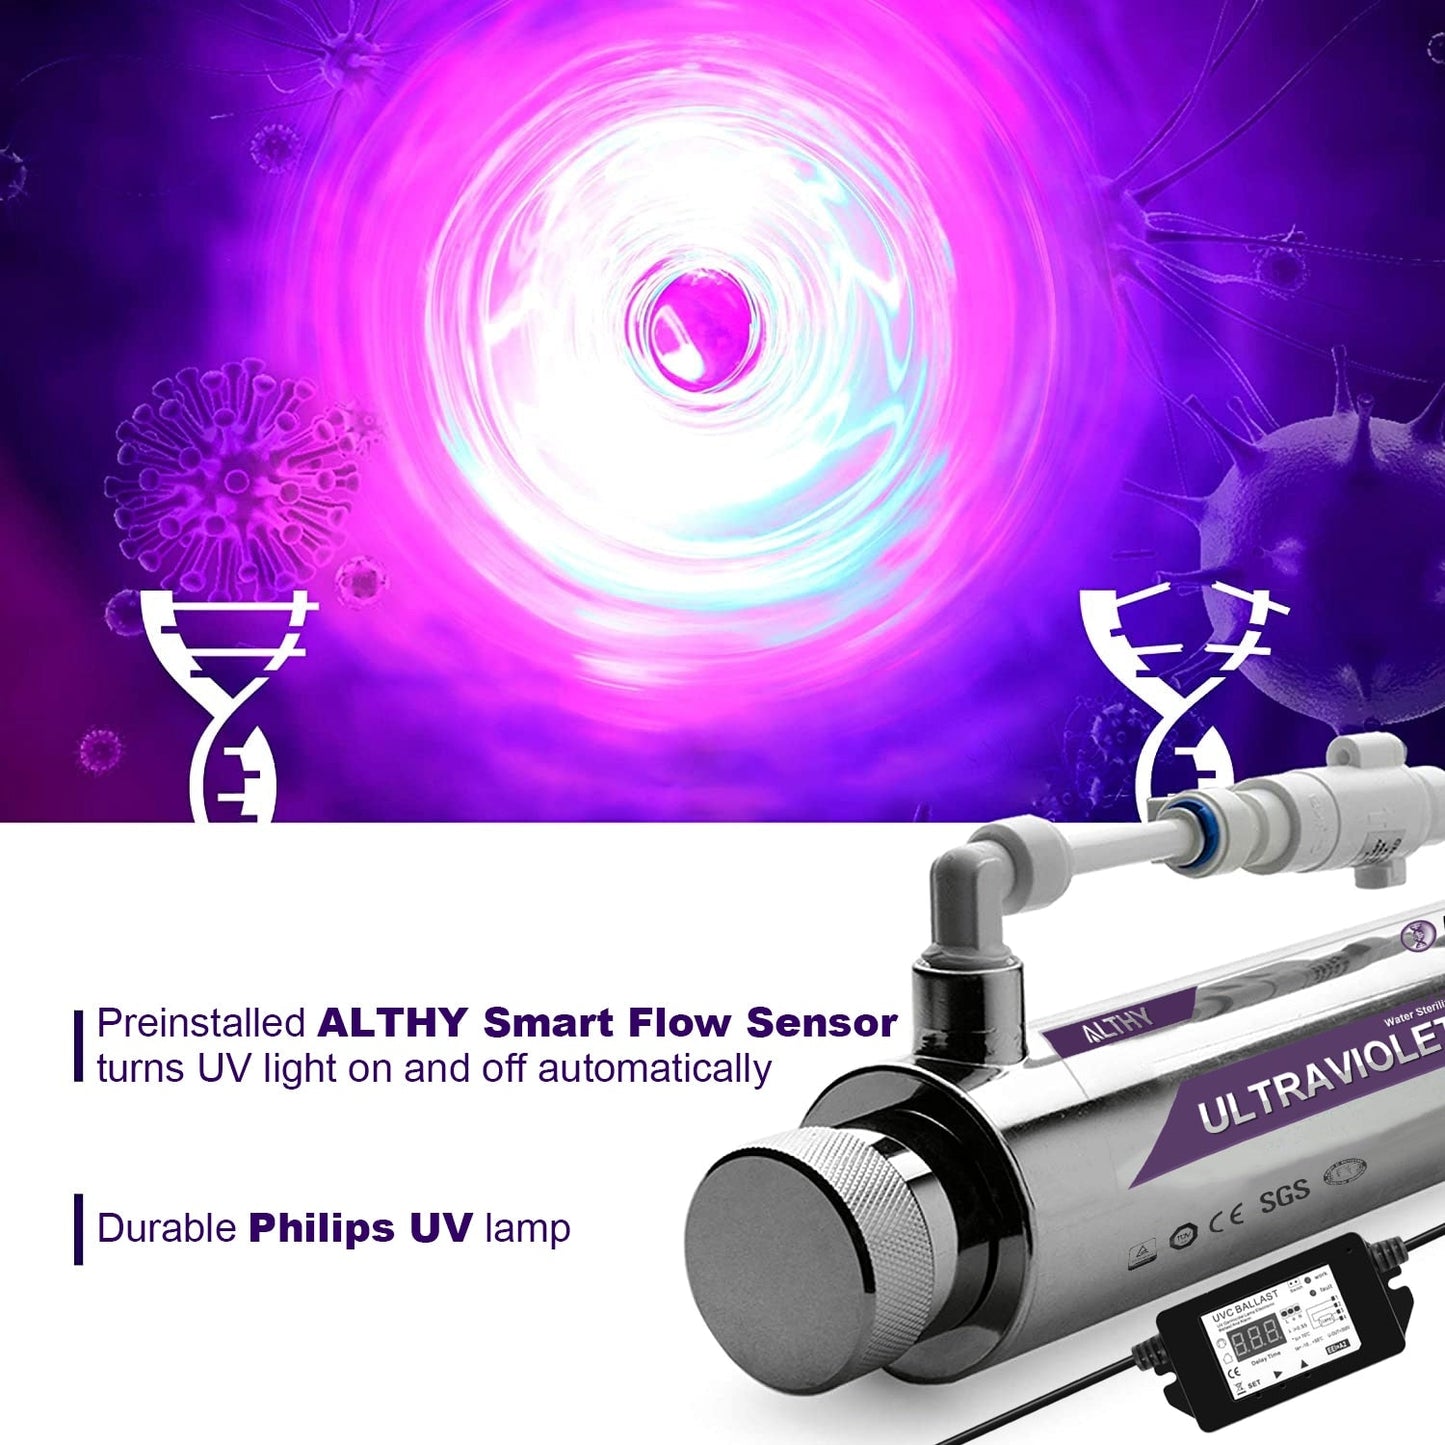 ALTHY UV Ultraviolet Light Water Purifier Sterilizer System Disinfection Filter +Smart Flow Control Switch Stainless Steel 1GPM  Hardware > Plumbing > Water Dispensing & Filtration 221.28 EZYSELLA SHOP